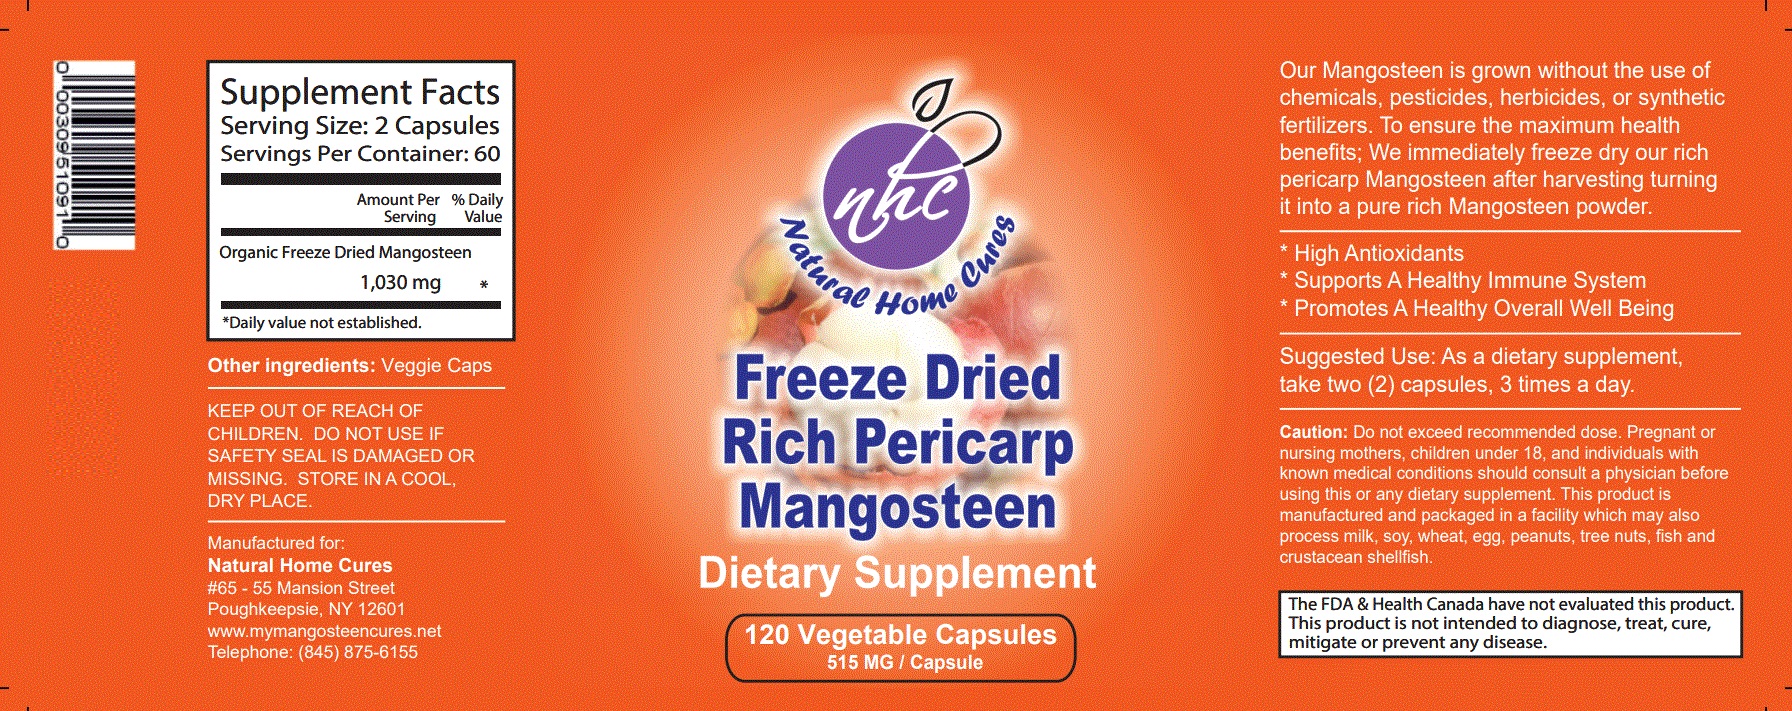 Mangosteen Product Label